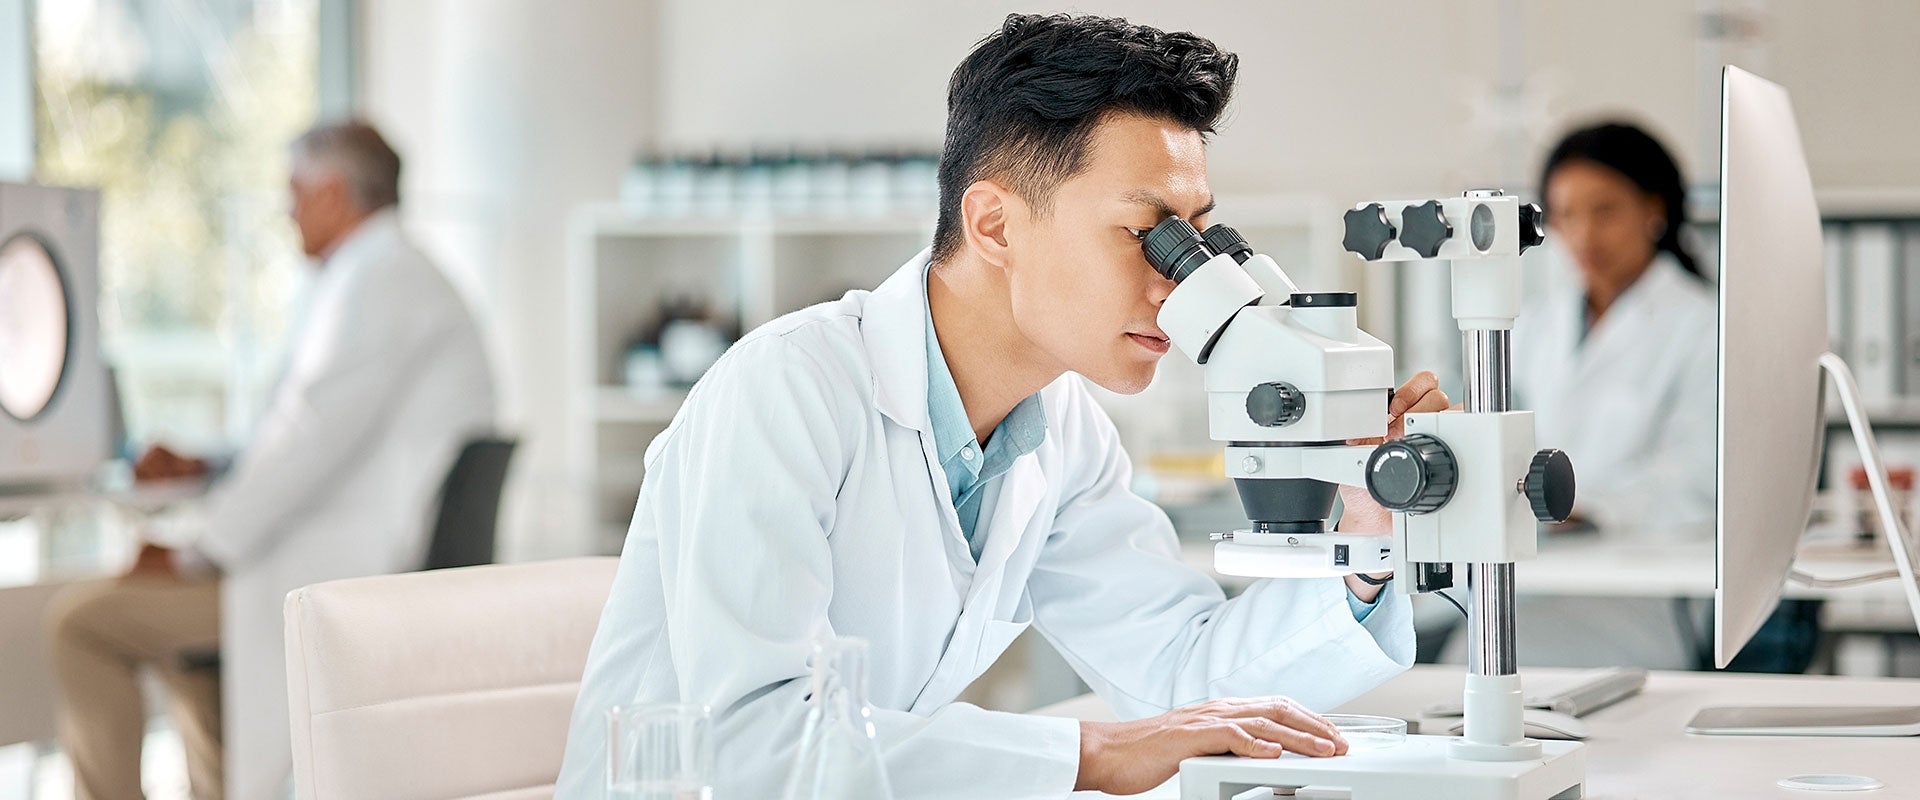 researcher looking into microscope